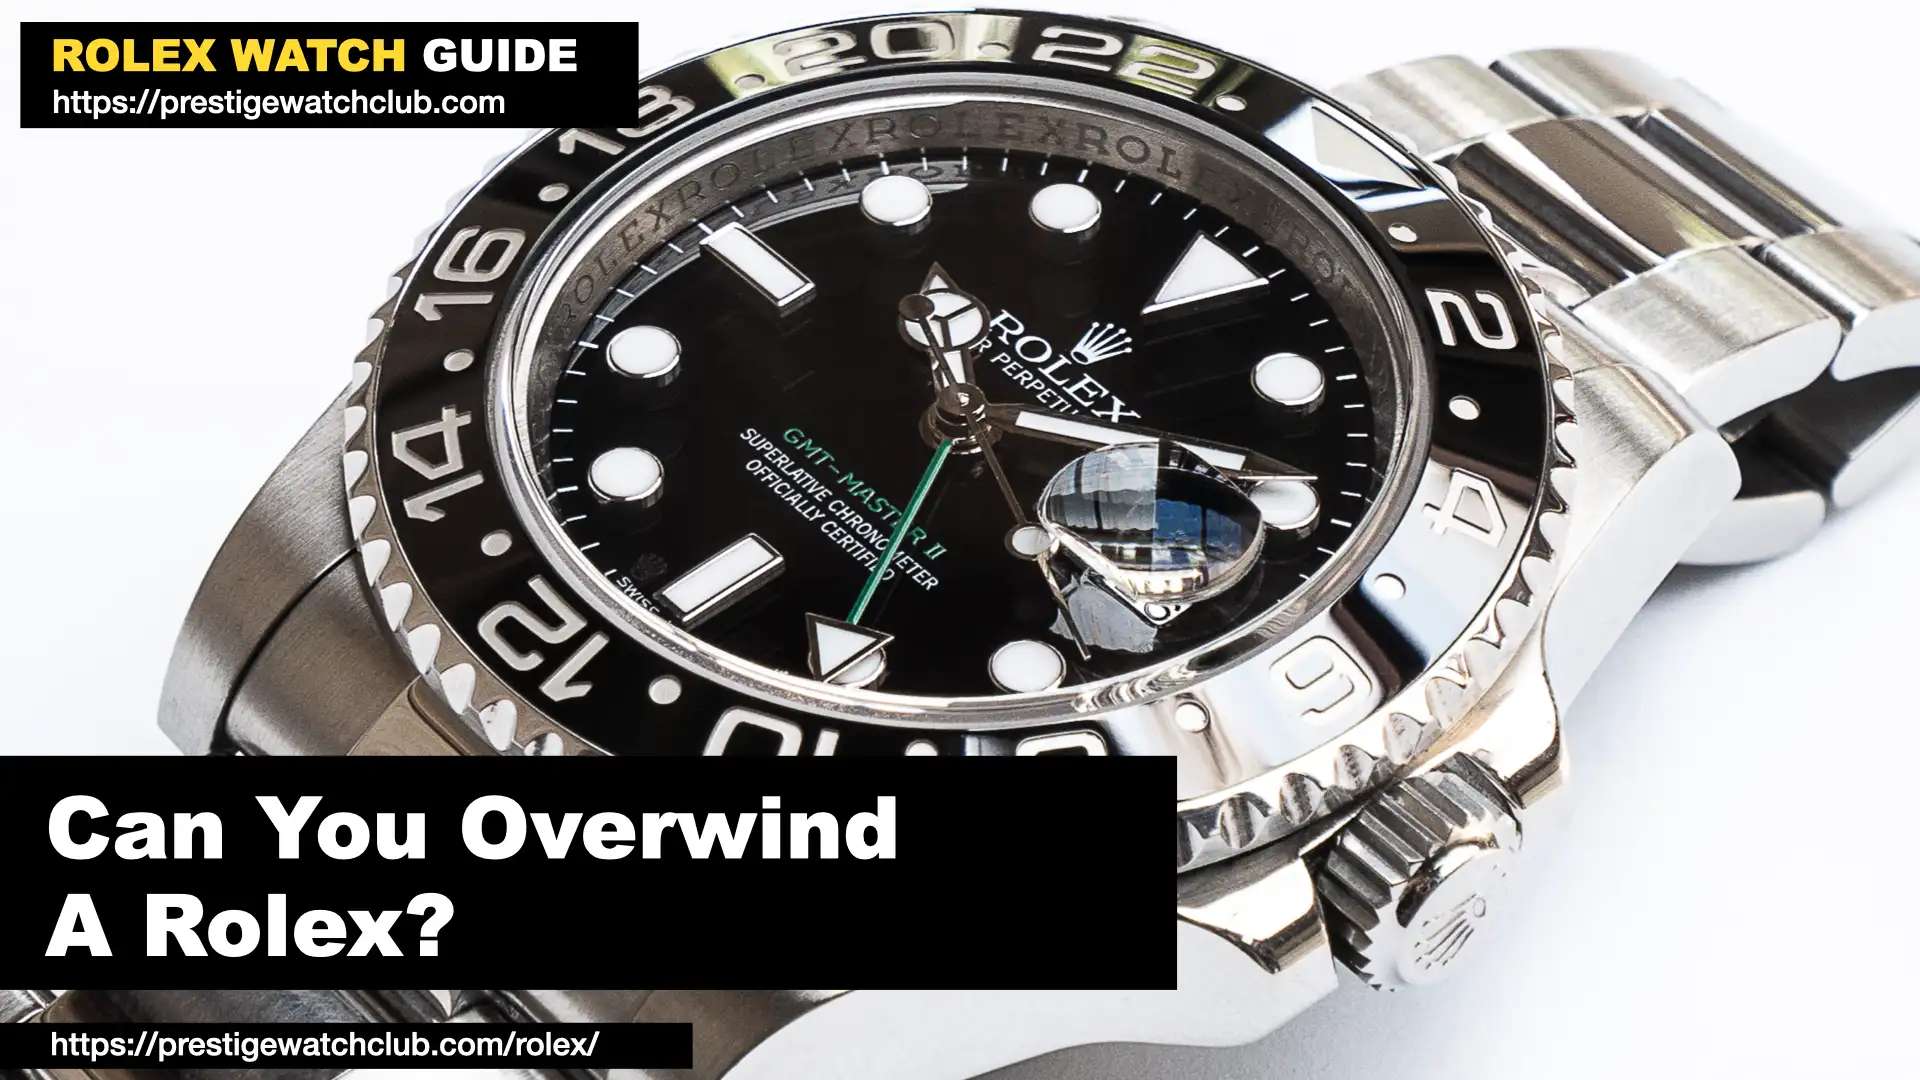 Can You Overwind A Rolex?